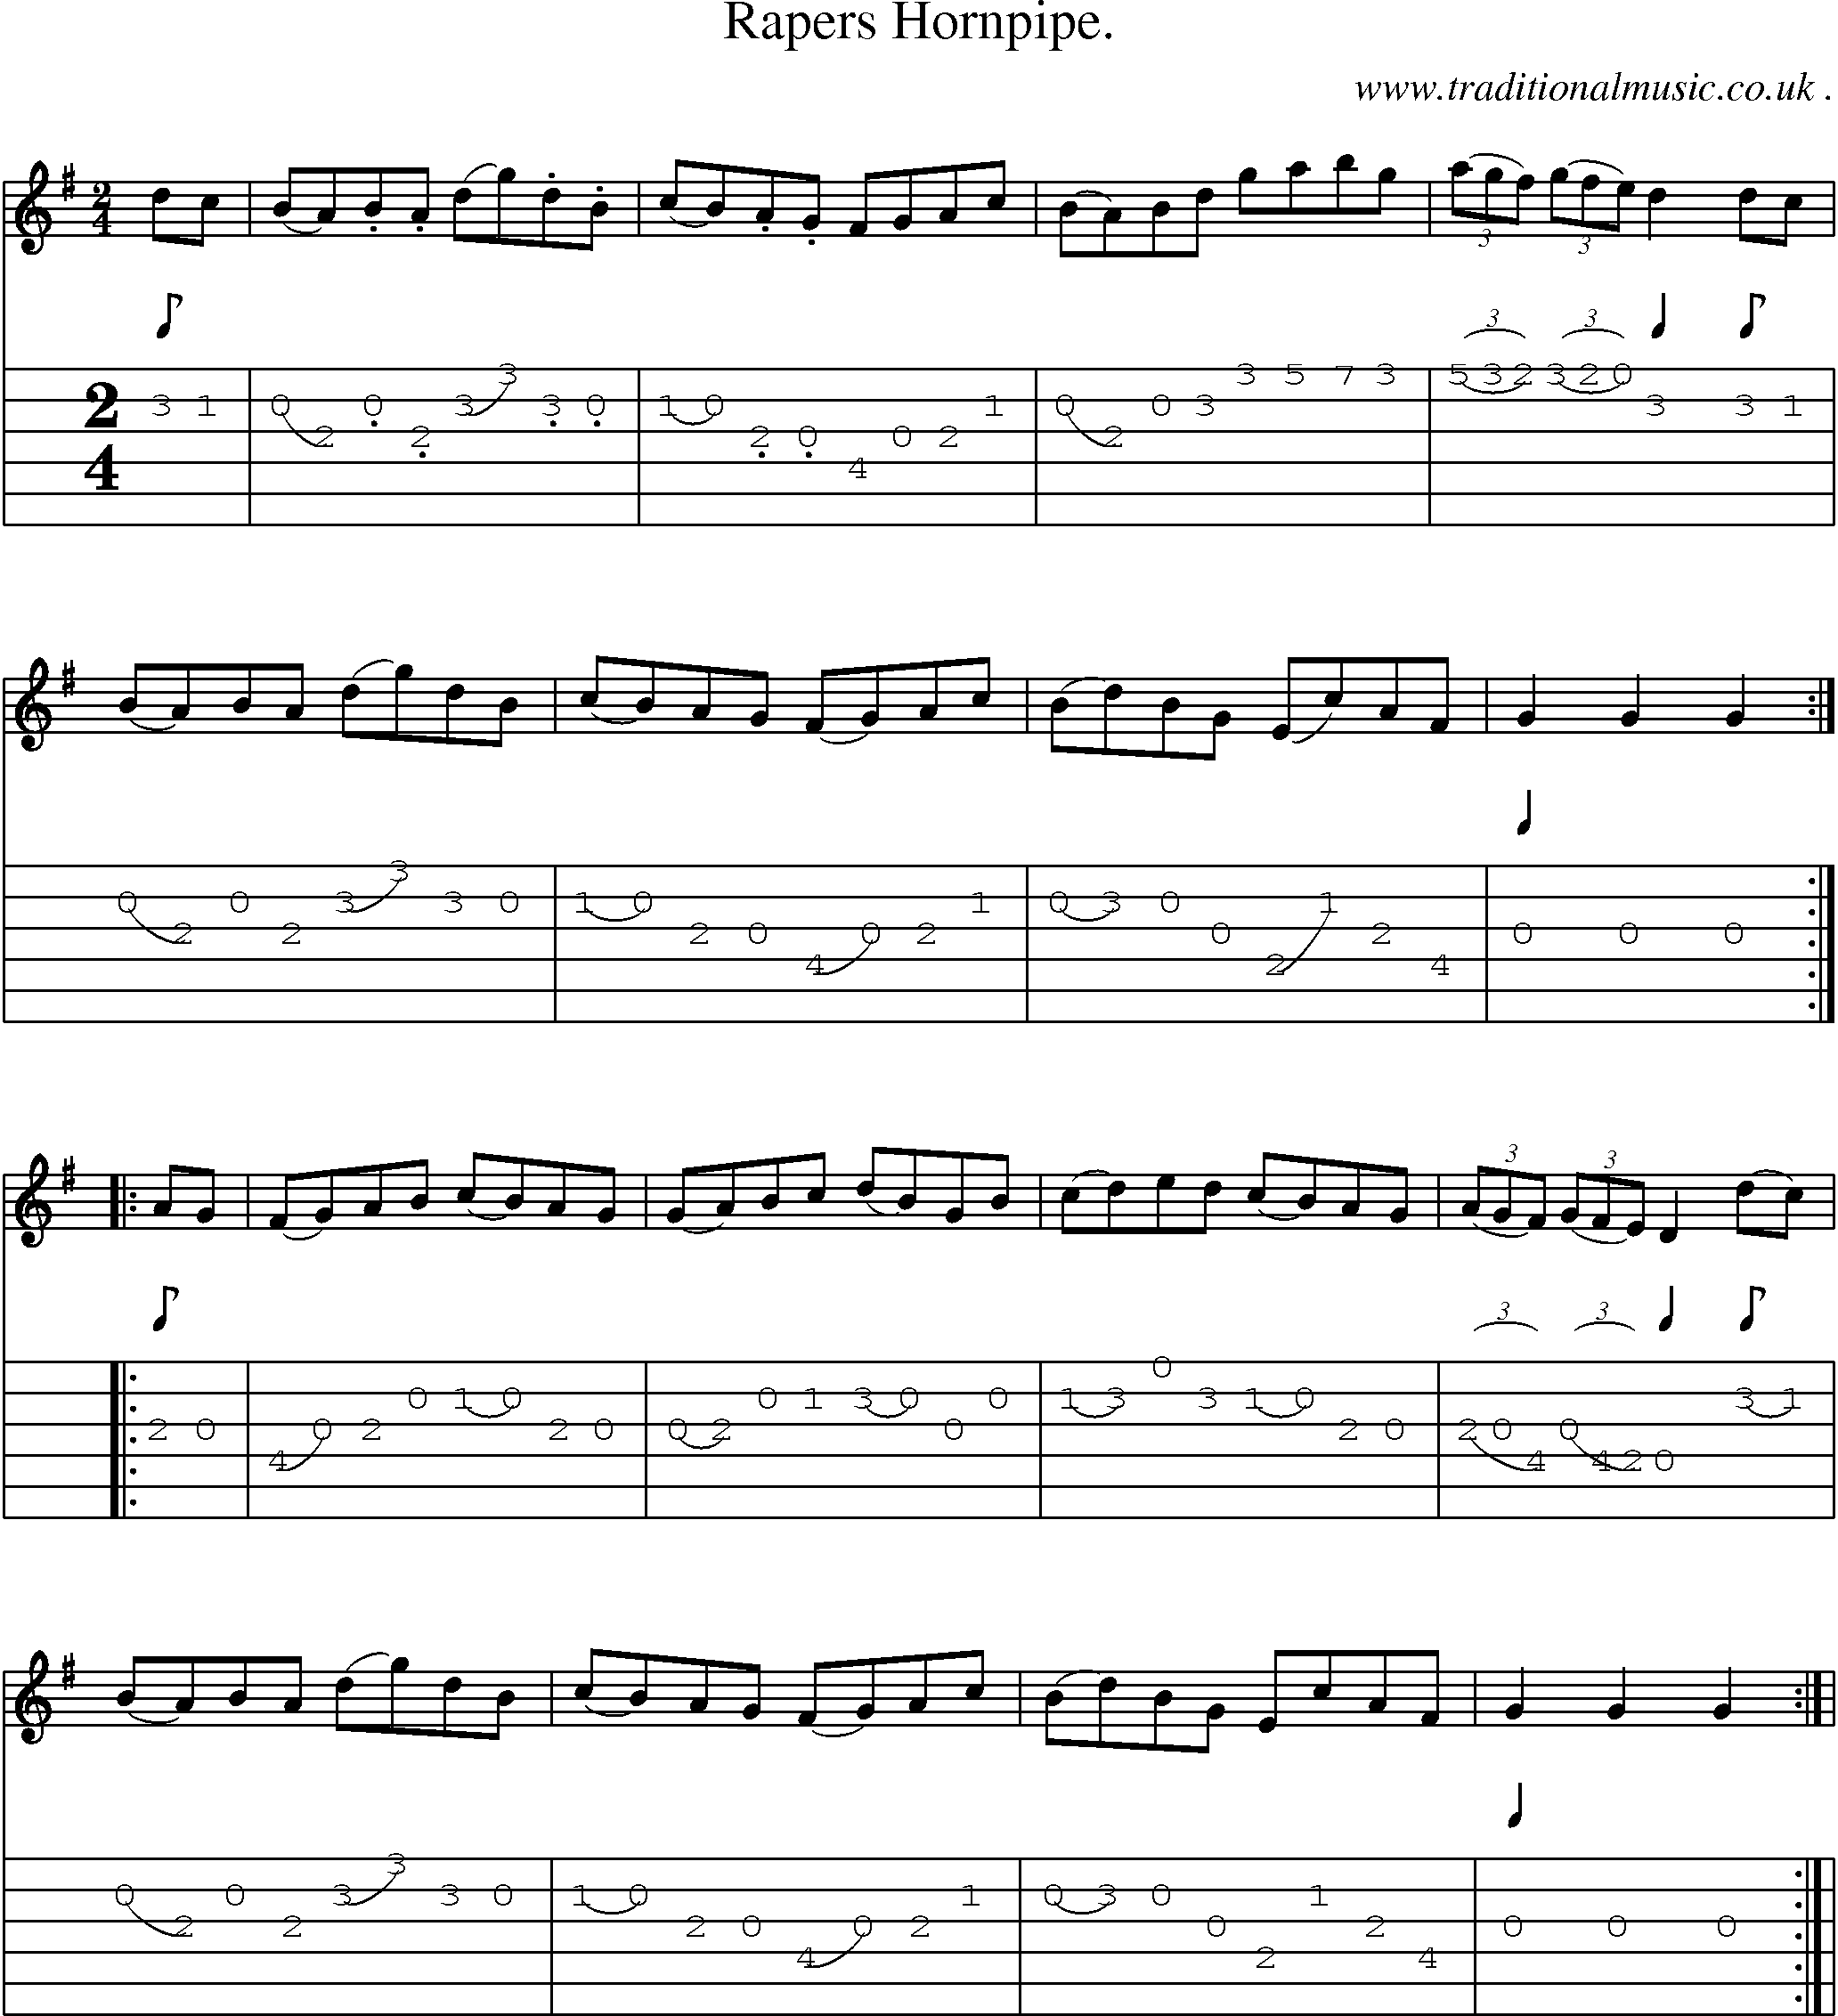 Sheet-Music and Guitar Tabs for Rapers Hornpipe